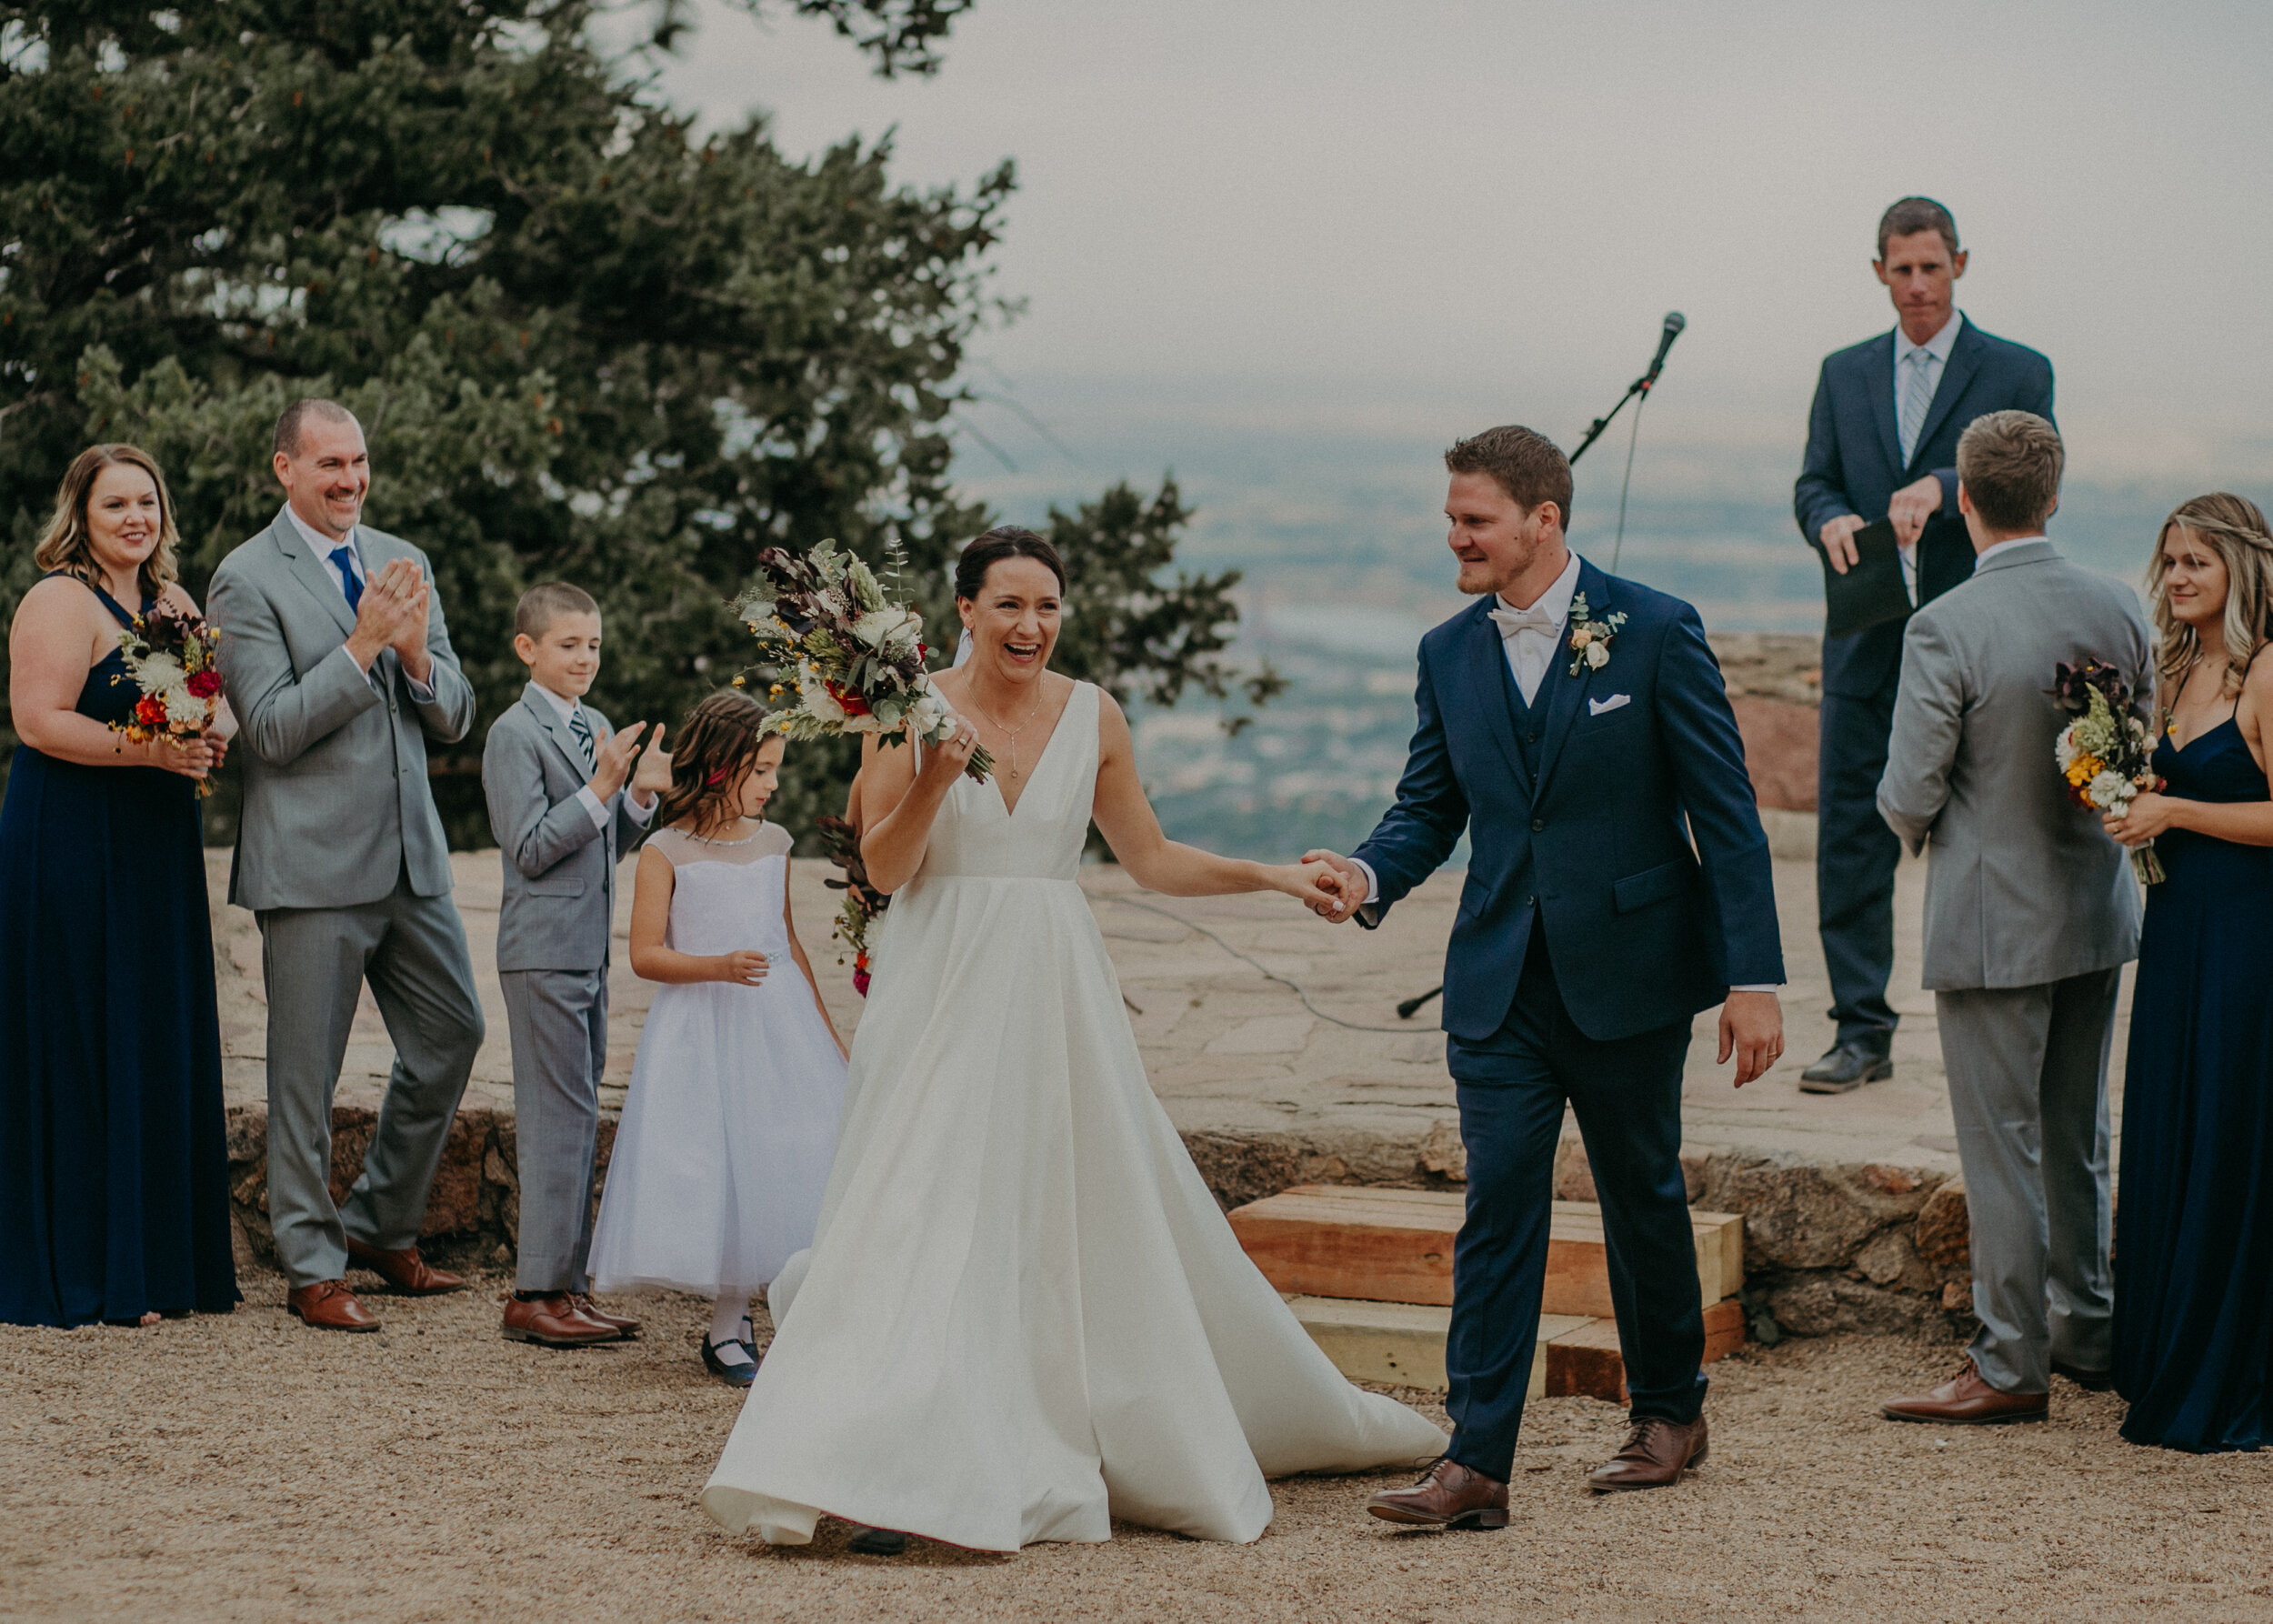  Andrea Wagner photography captures an elopement on Flagstaff Mountain in Colorado 